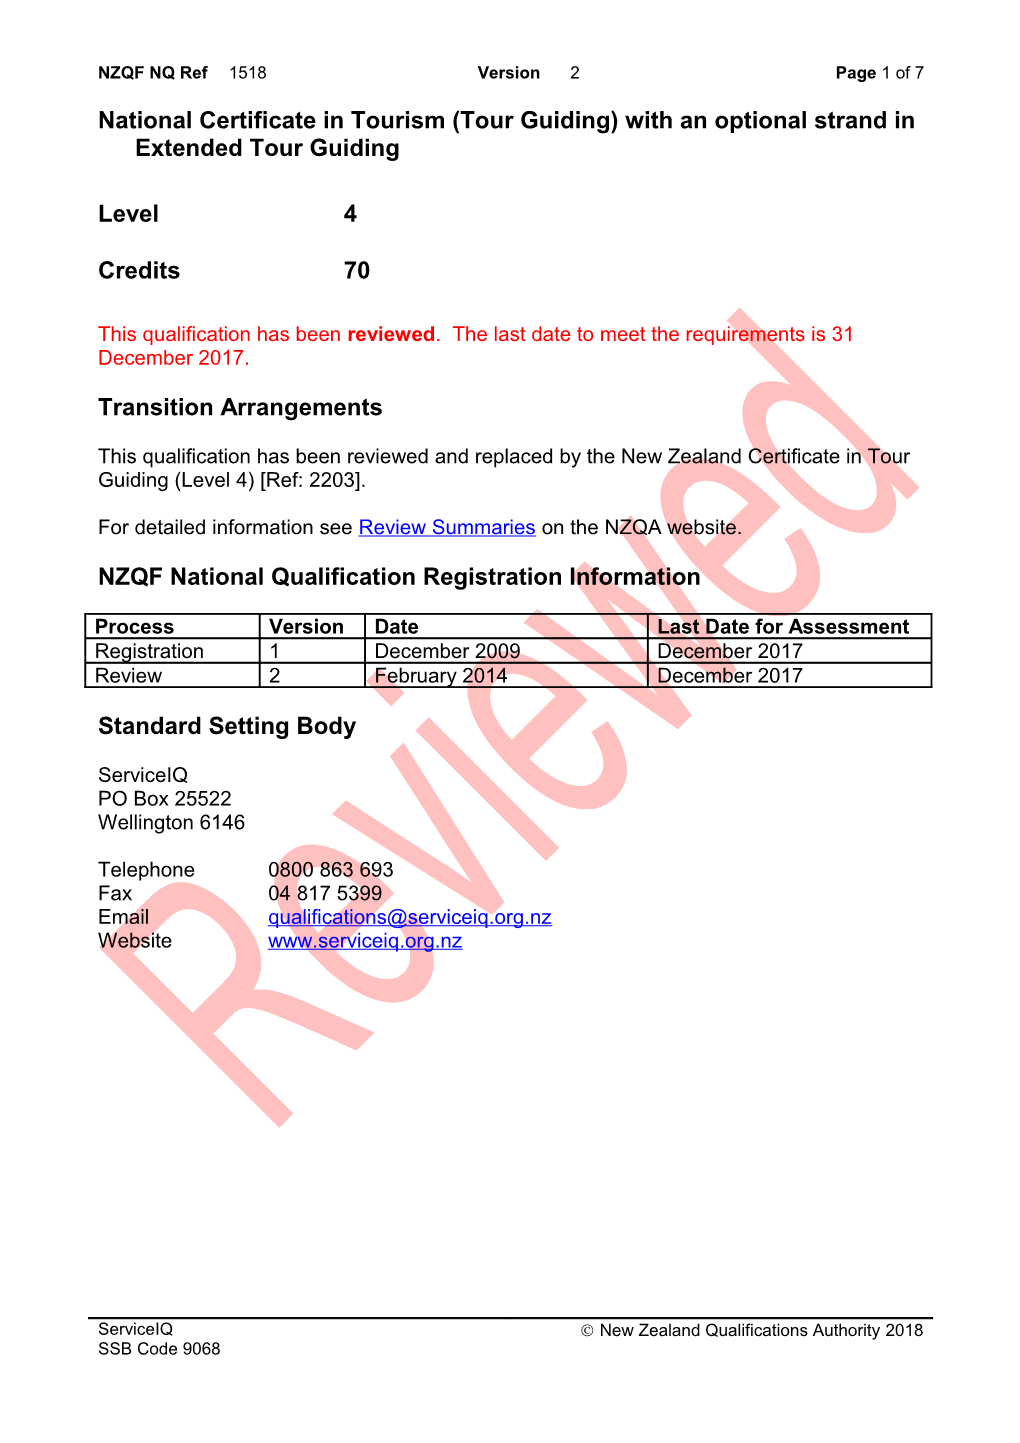 1518 National Certificate in Tourism (Tour Guiding) with an Optional Strand in Extended